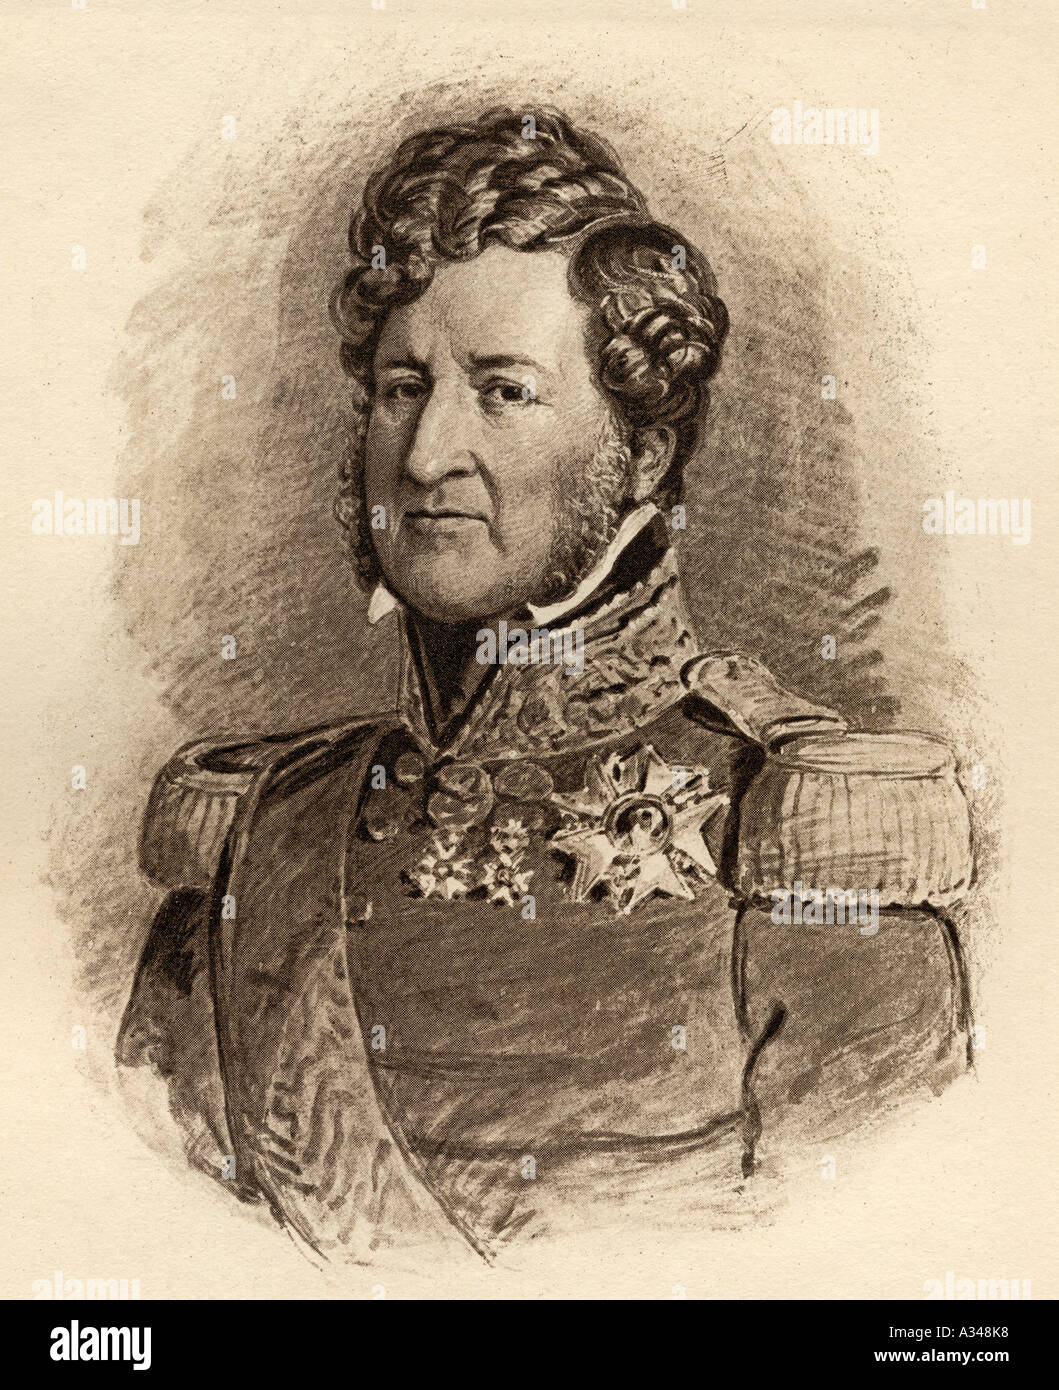 Episode of the Revolution of 1830, day of July: the lieutenant general of  Louis-Philippe d'Orleans (who became King of France Louis Philippe I)